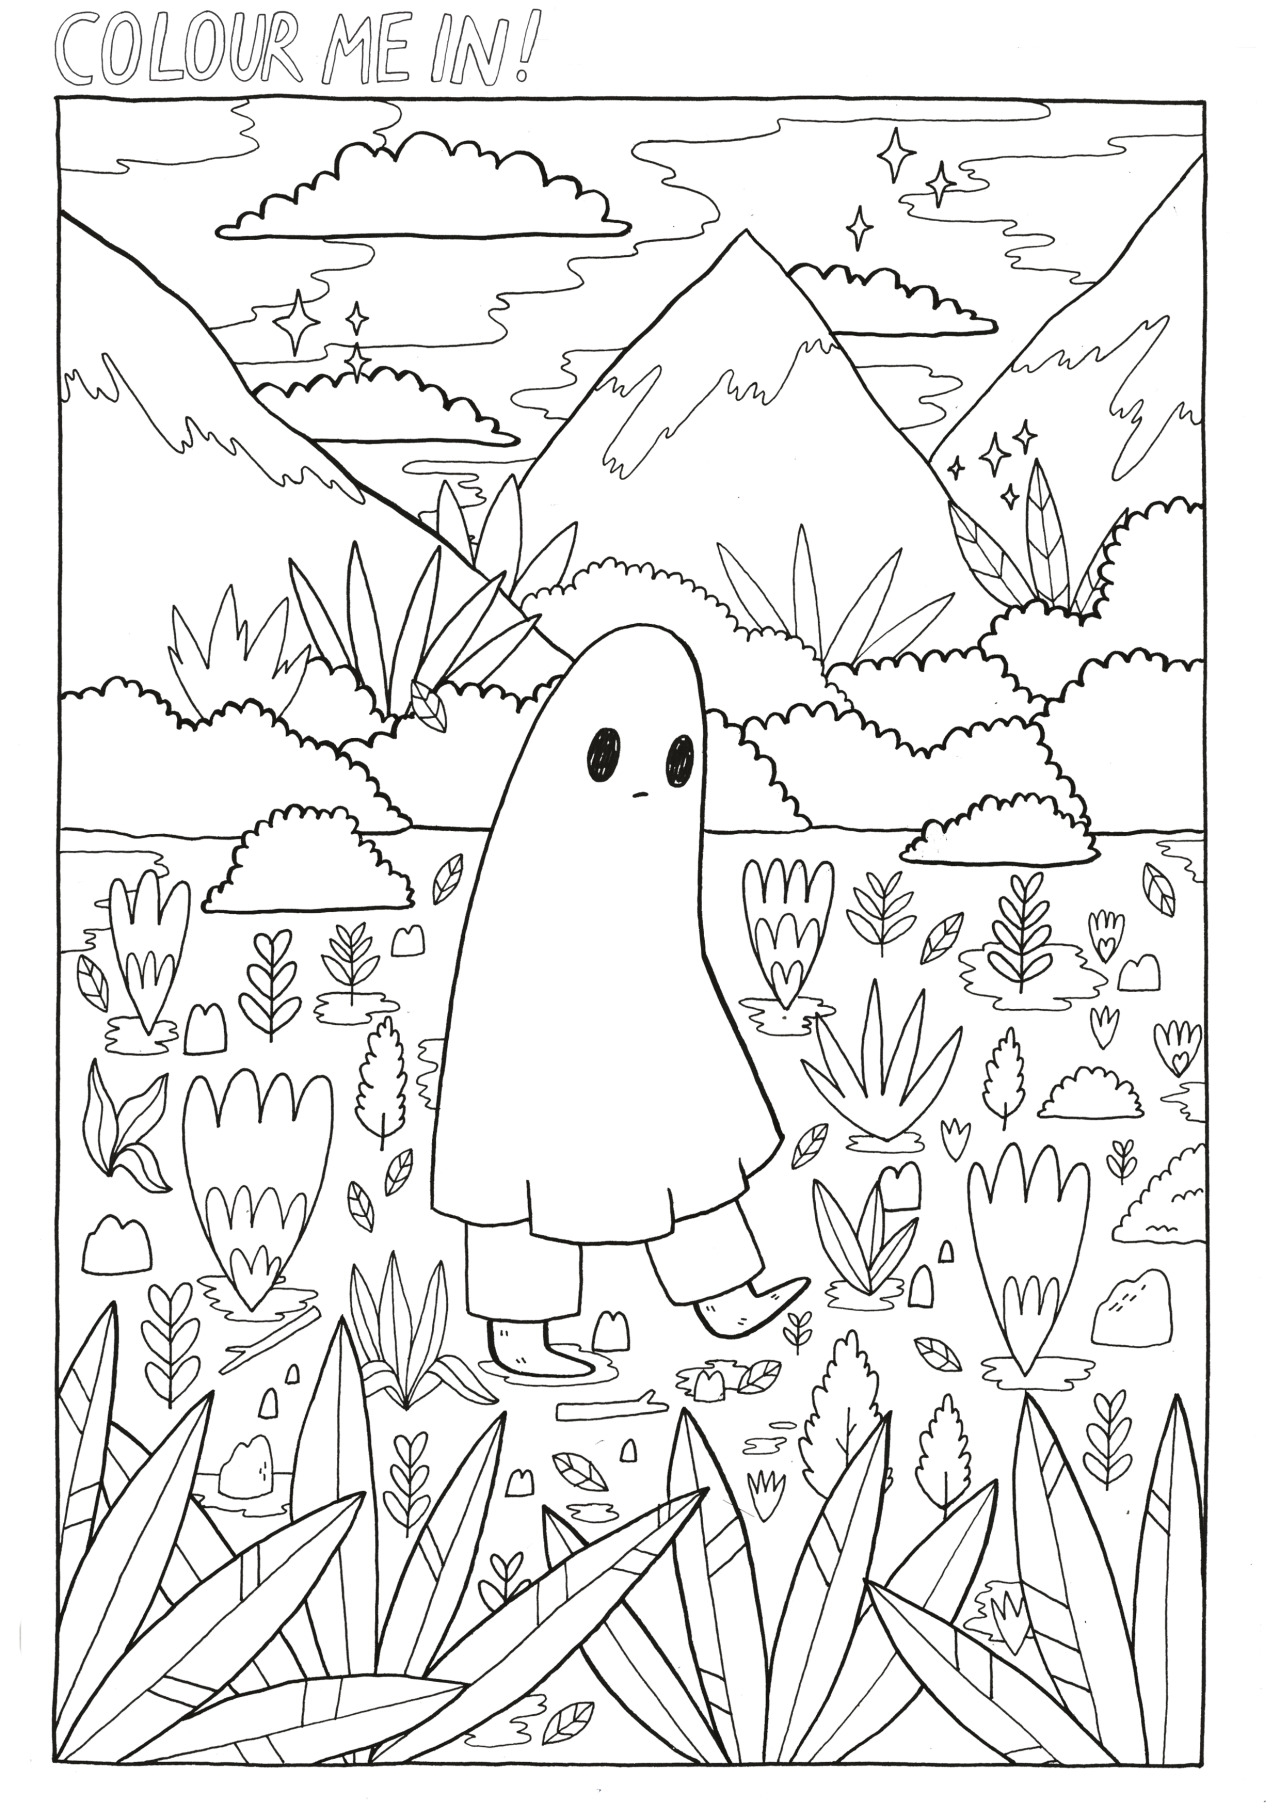 Coloring Pages Sad For Adults Printable - MELIE.COLORING.MEWARNAI.SITE